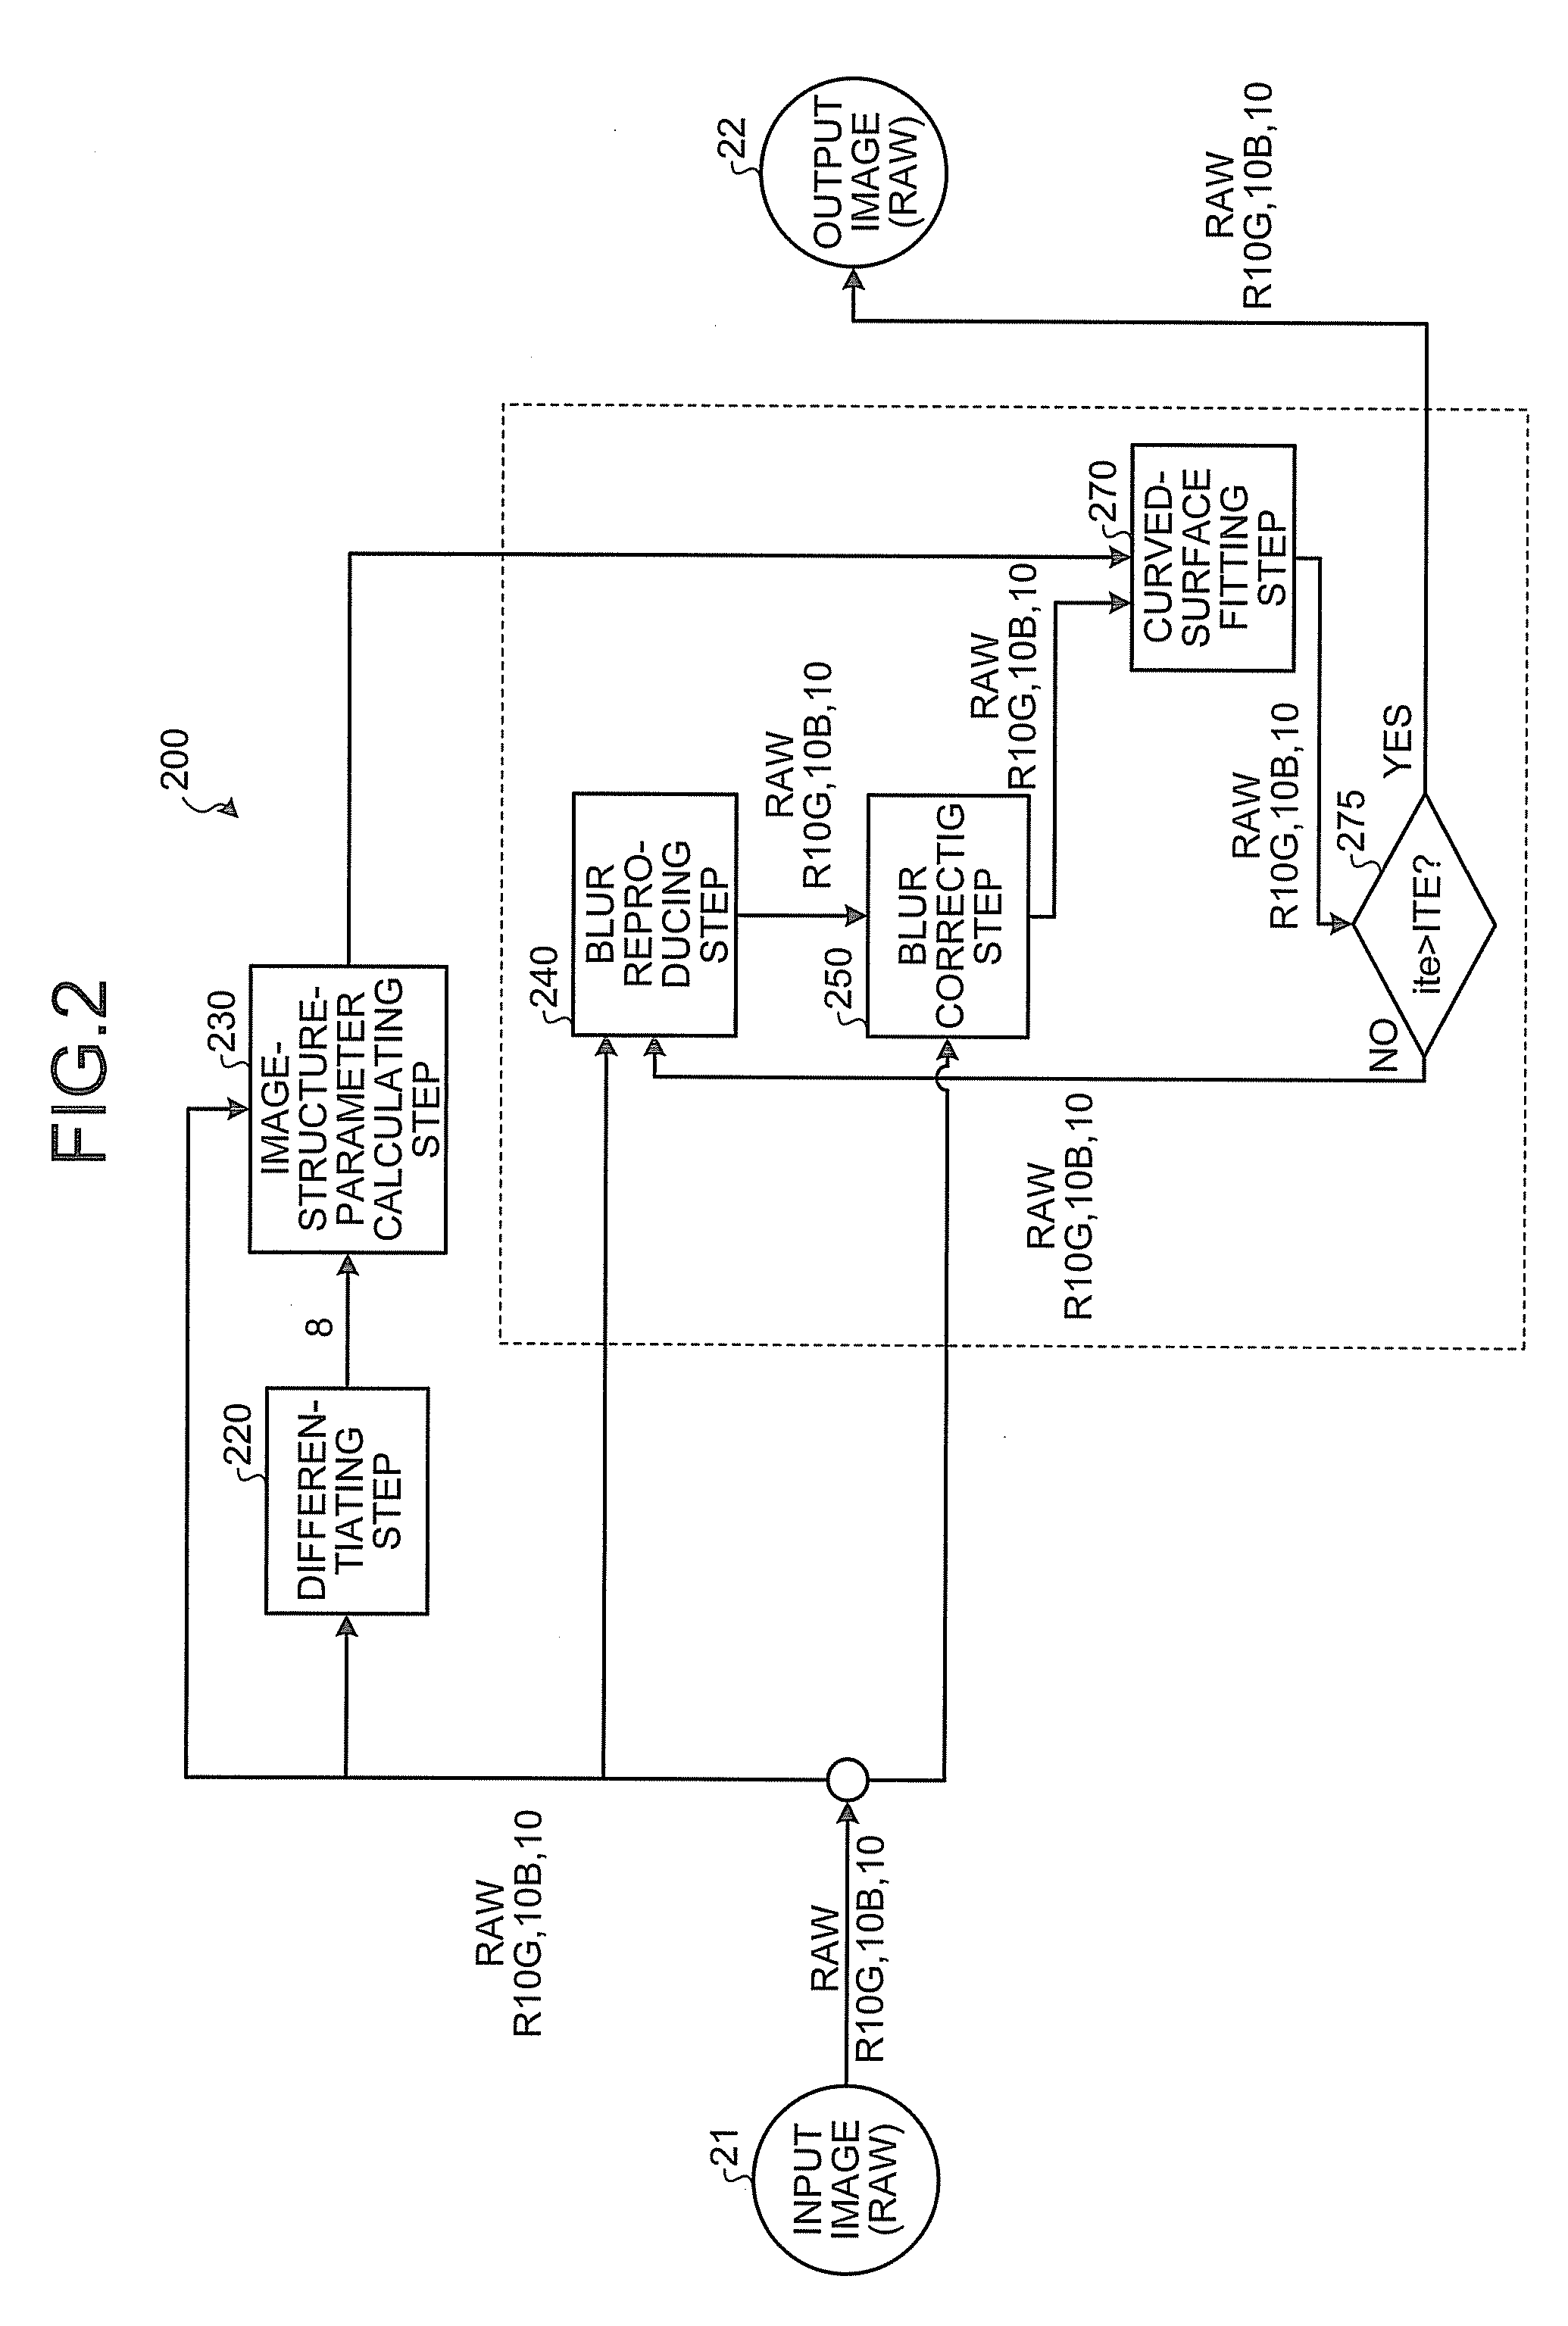 Image processing apparatus, imaging device, image processing method, and computer program product